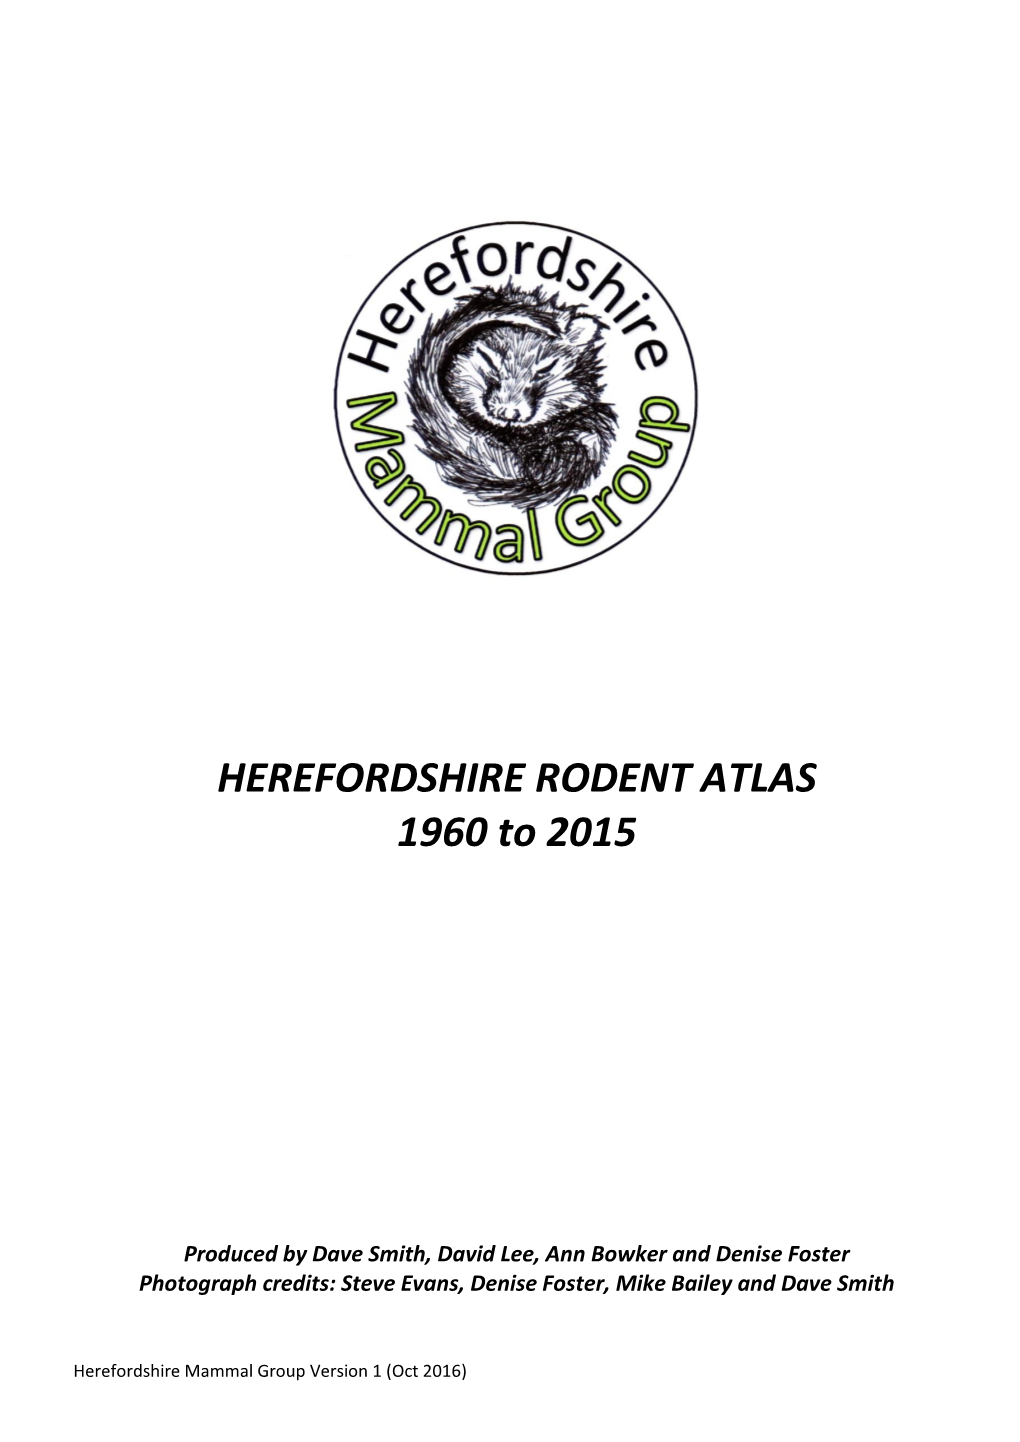 HEREFORDSHIRE RODENT ATLAS 1960 to 2015